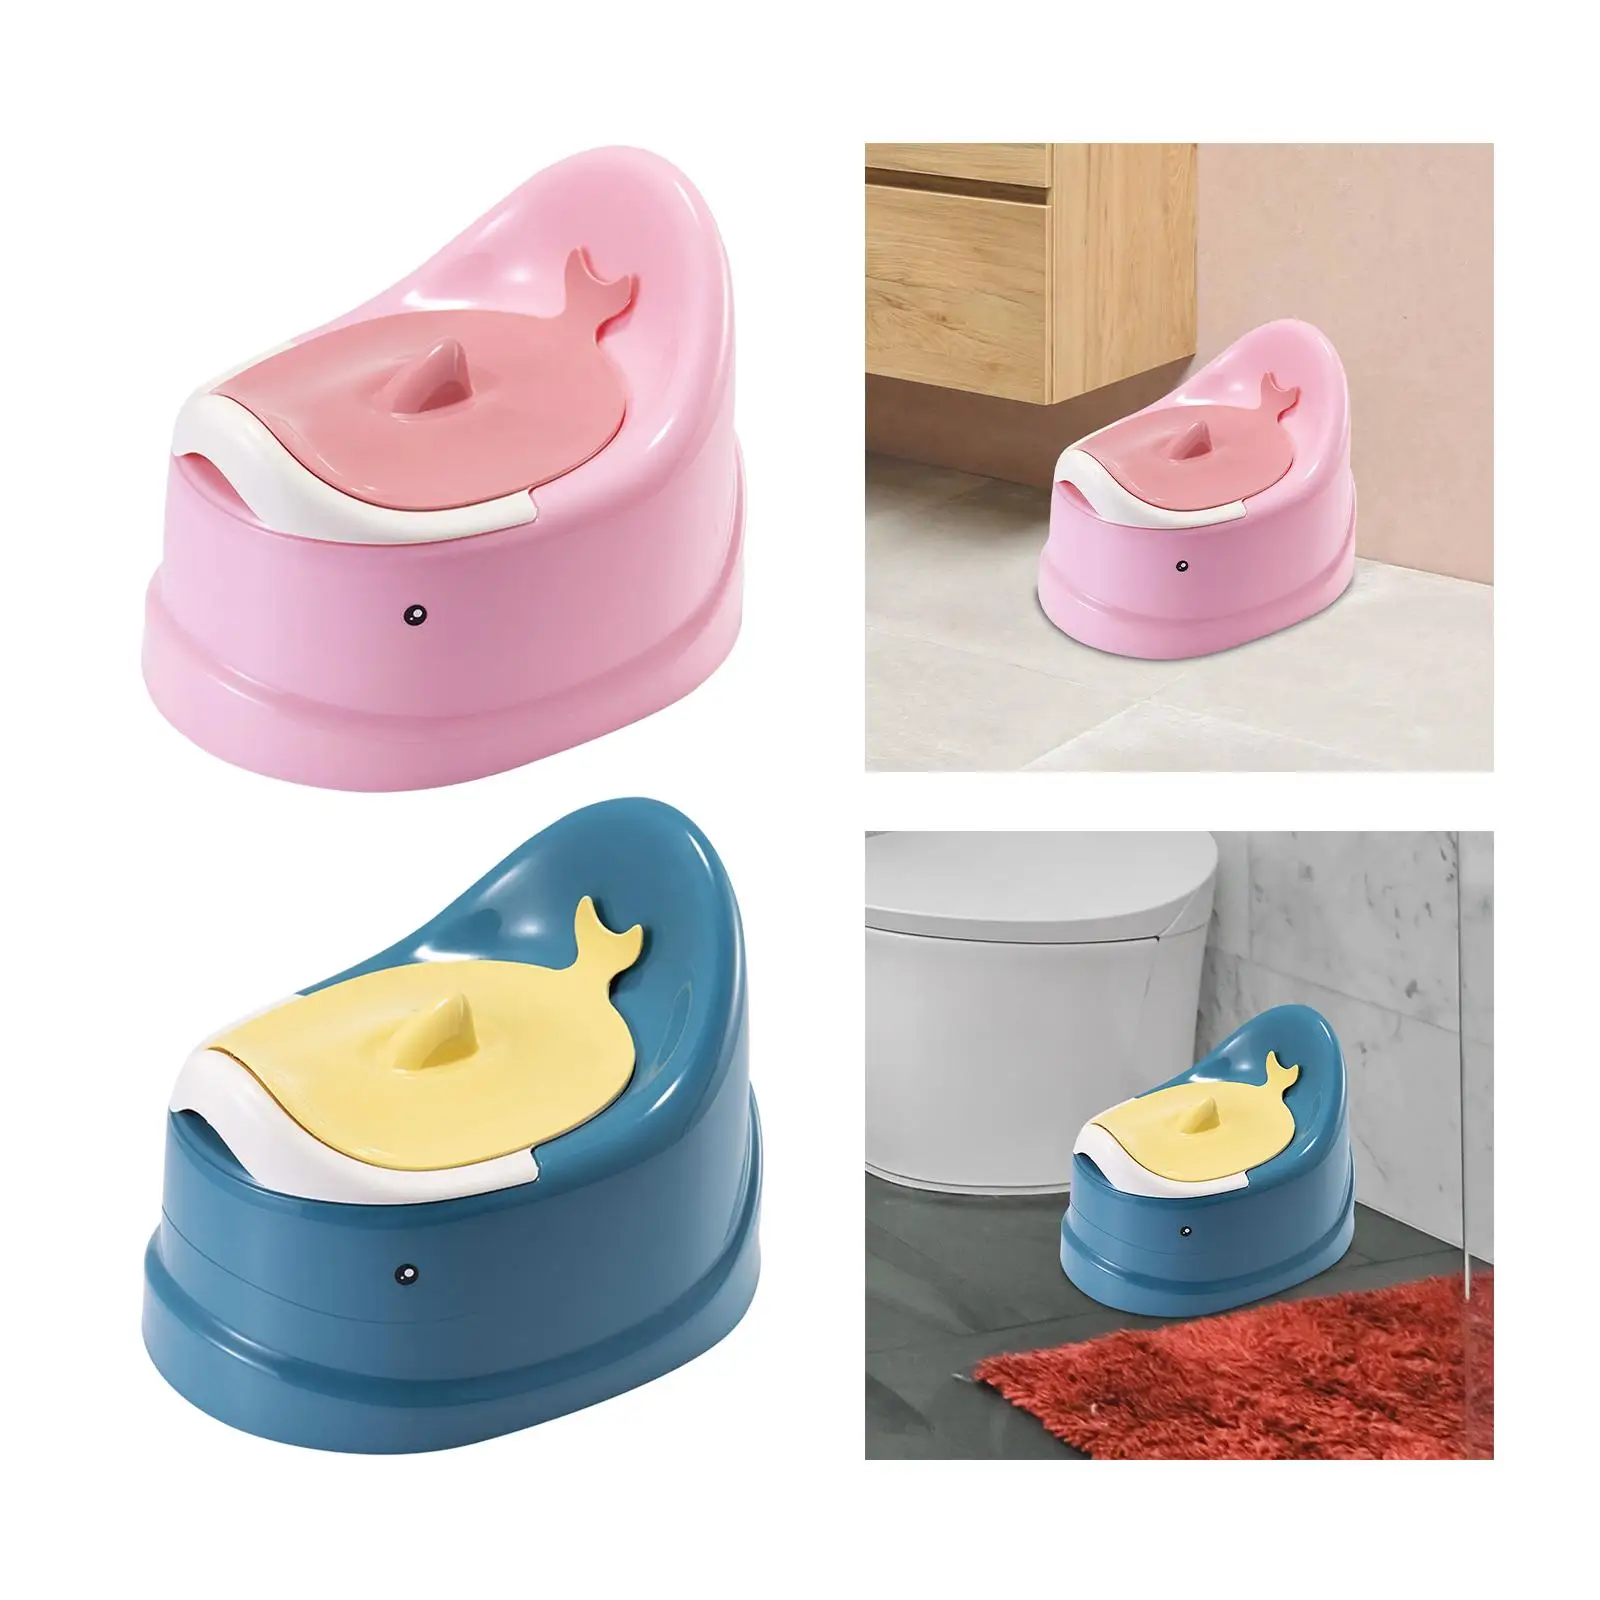 Potty Training Toilet Lovely for Toddlers Indoor Travel Removable Baby Potty